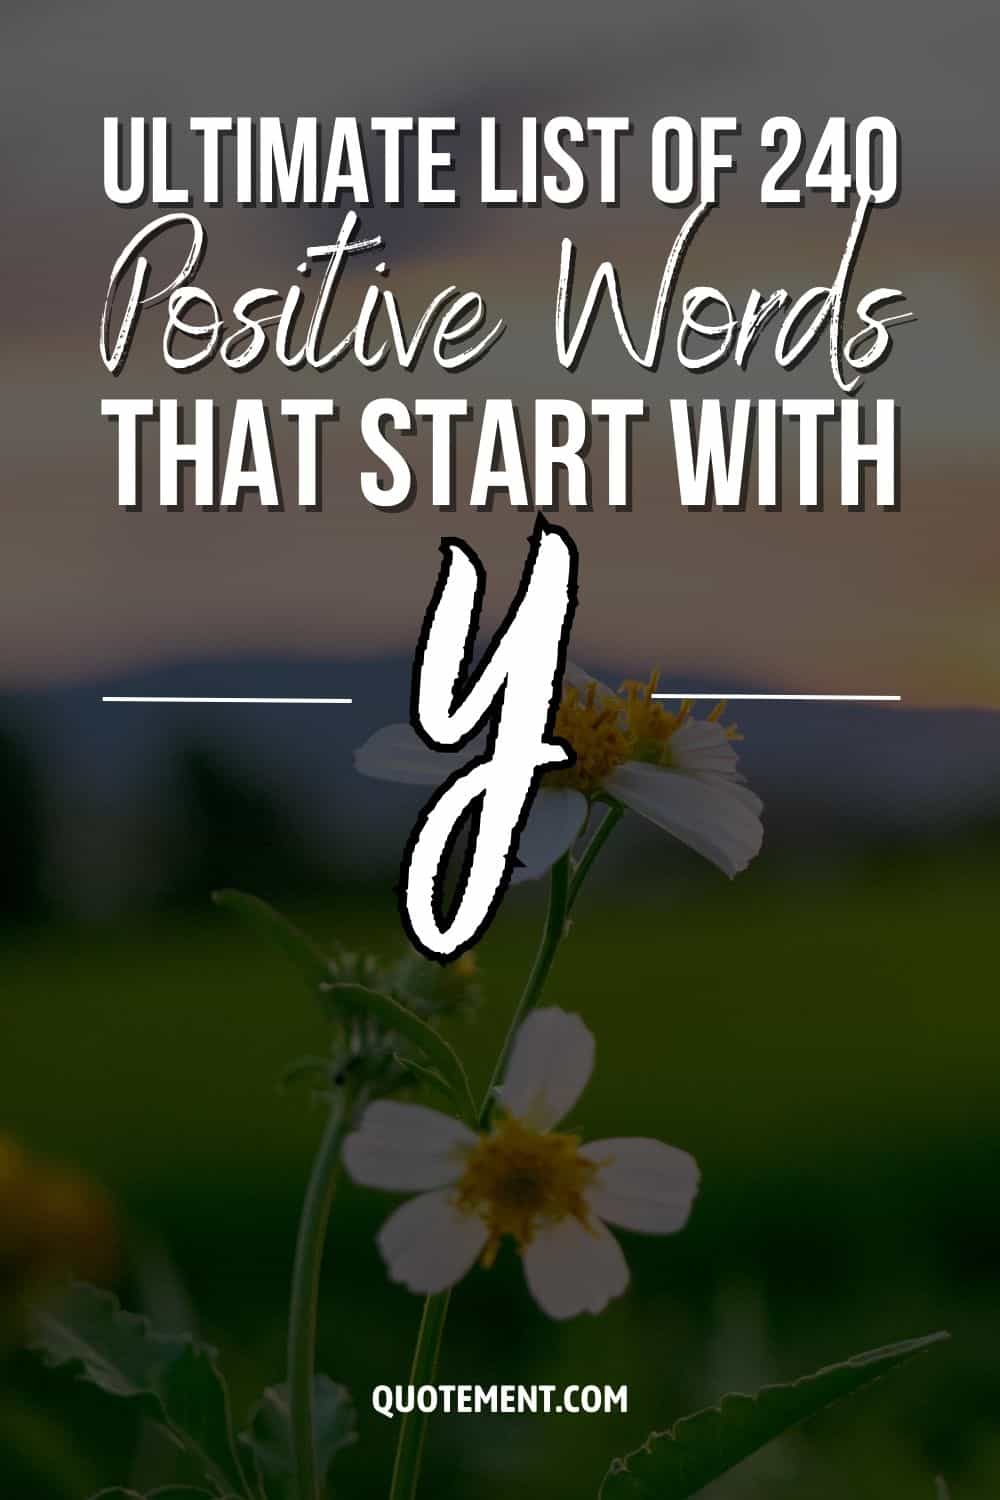 Ultimate List Of 240 Positive Words That Start With Y